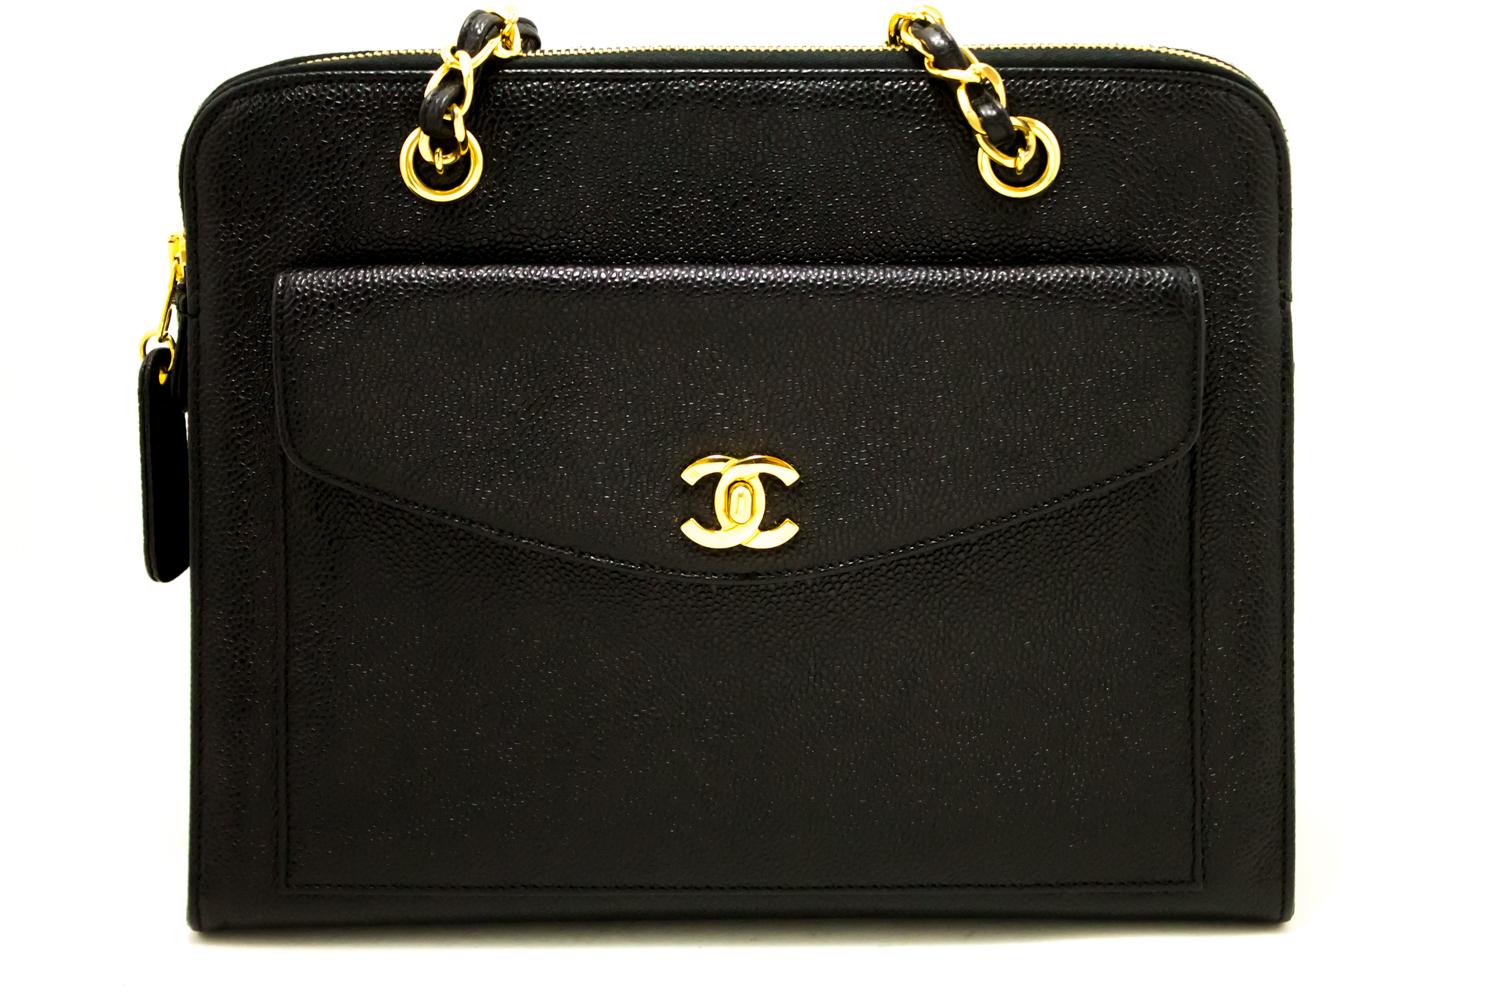 An authentic CHANEL Caviar Large Chain Shoulder Bag Black Leather Gold Hardware. The color is Black. The outside material is Leather. The pattern is Solid.
Conditions & Ratings
Outside material: Caviar leather
Color: Black
Closure: Zipper
Hardware